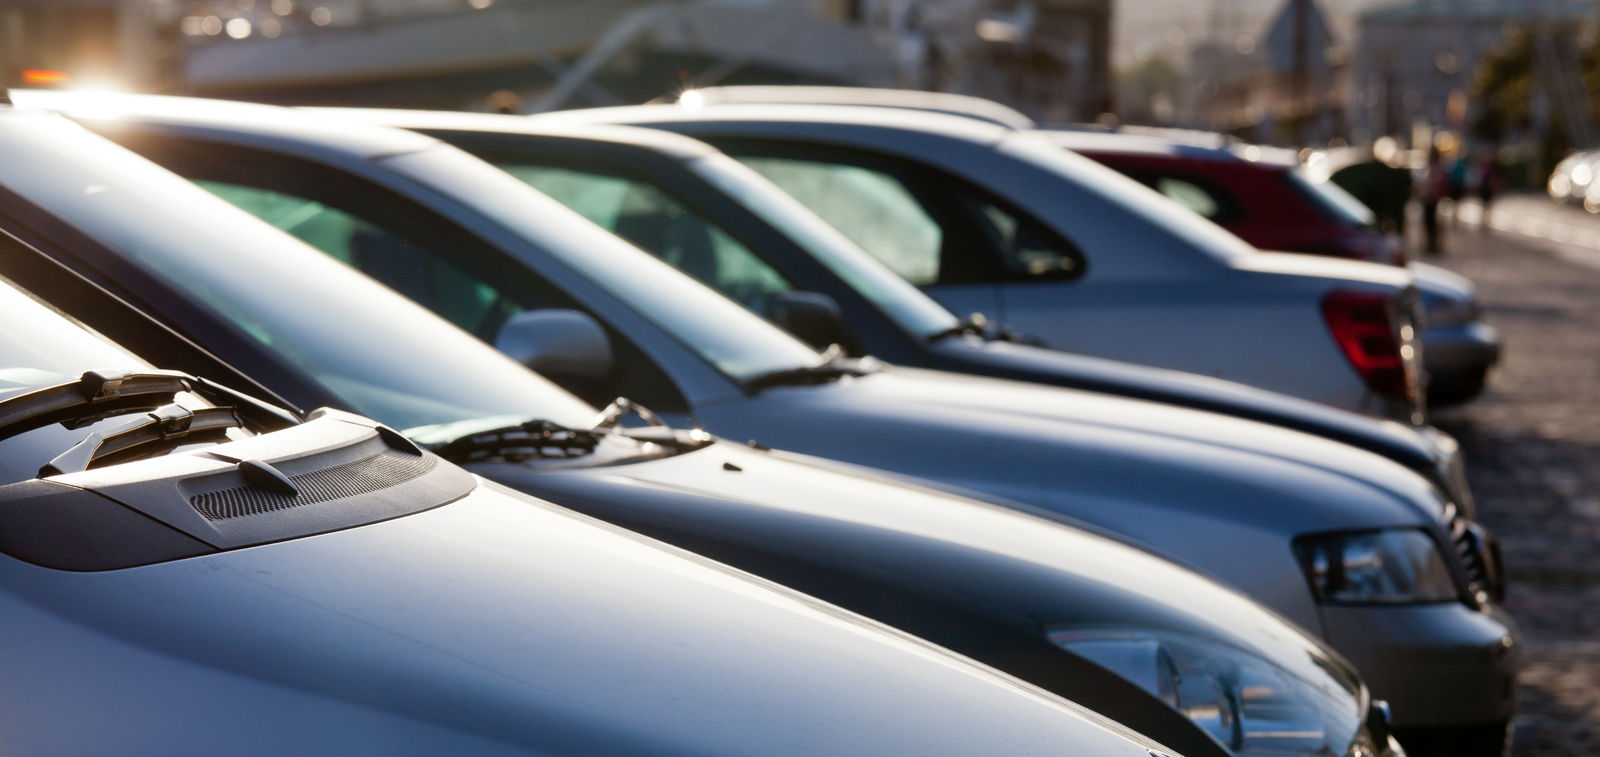 Do I need to have insurance before I buy a used car?